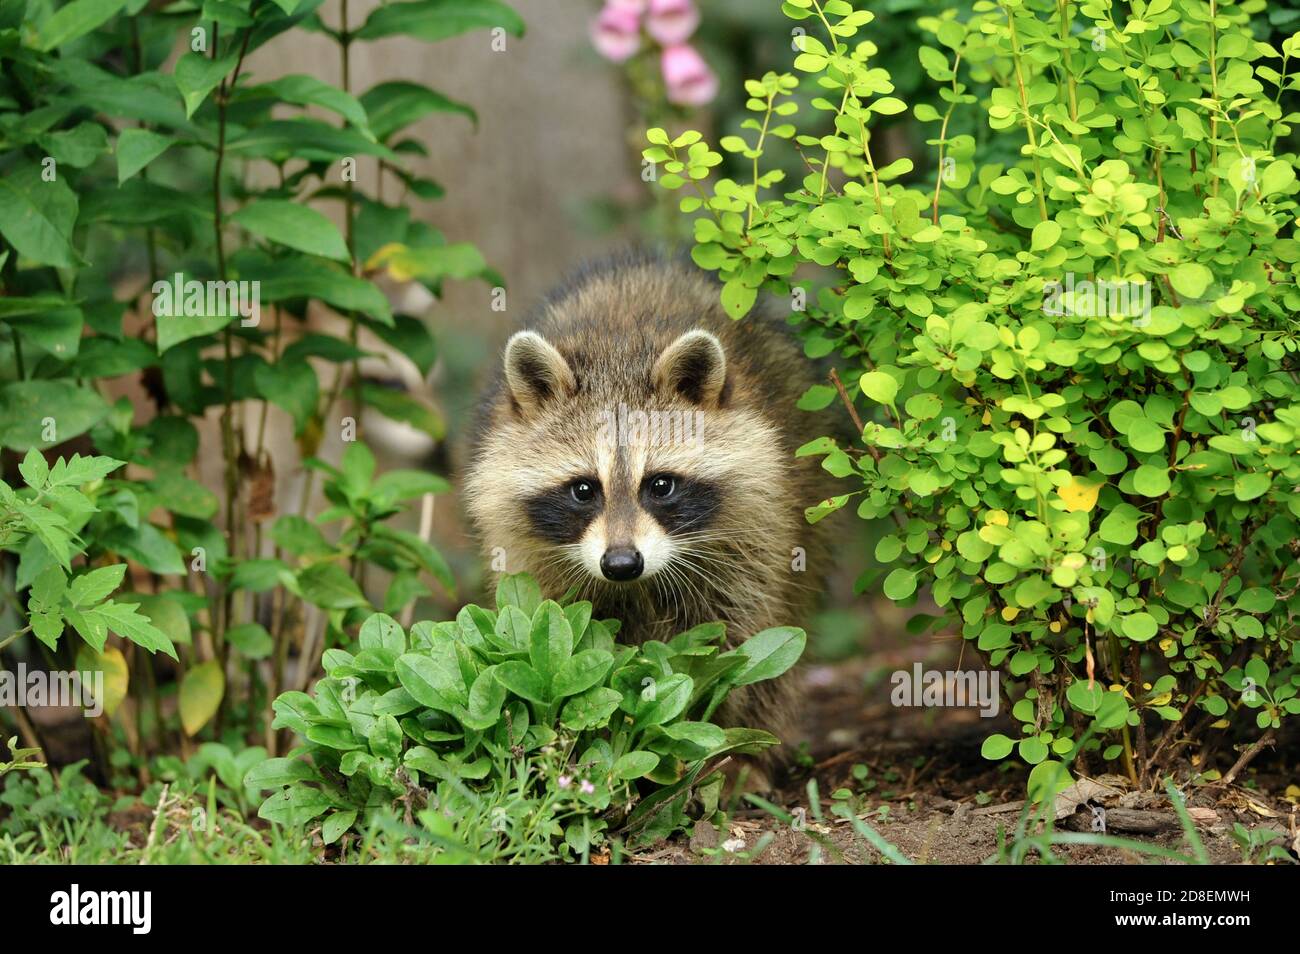 A baby raccoon in the grass Stock Photo